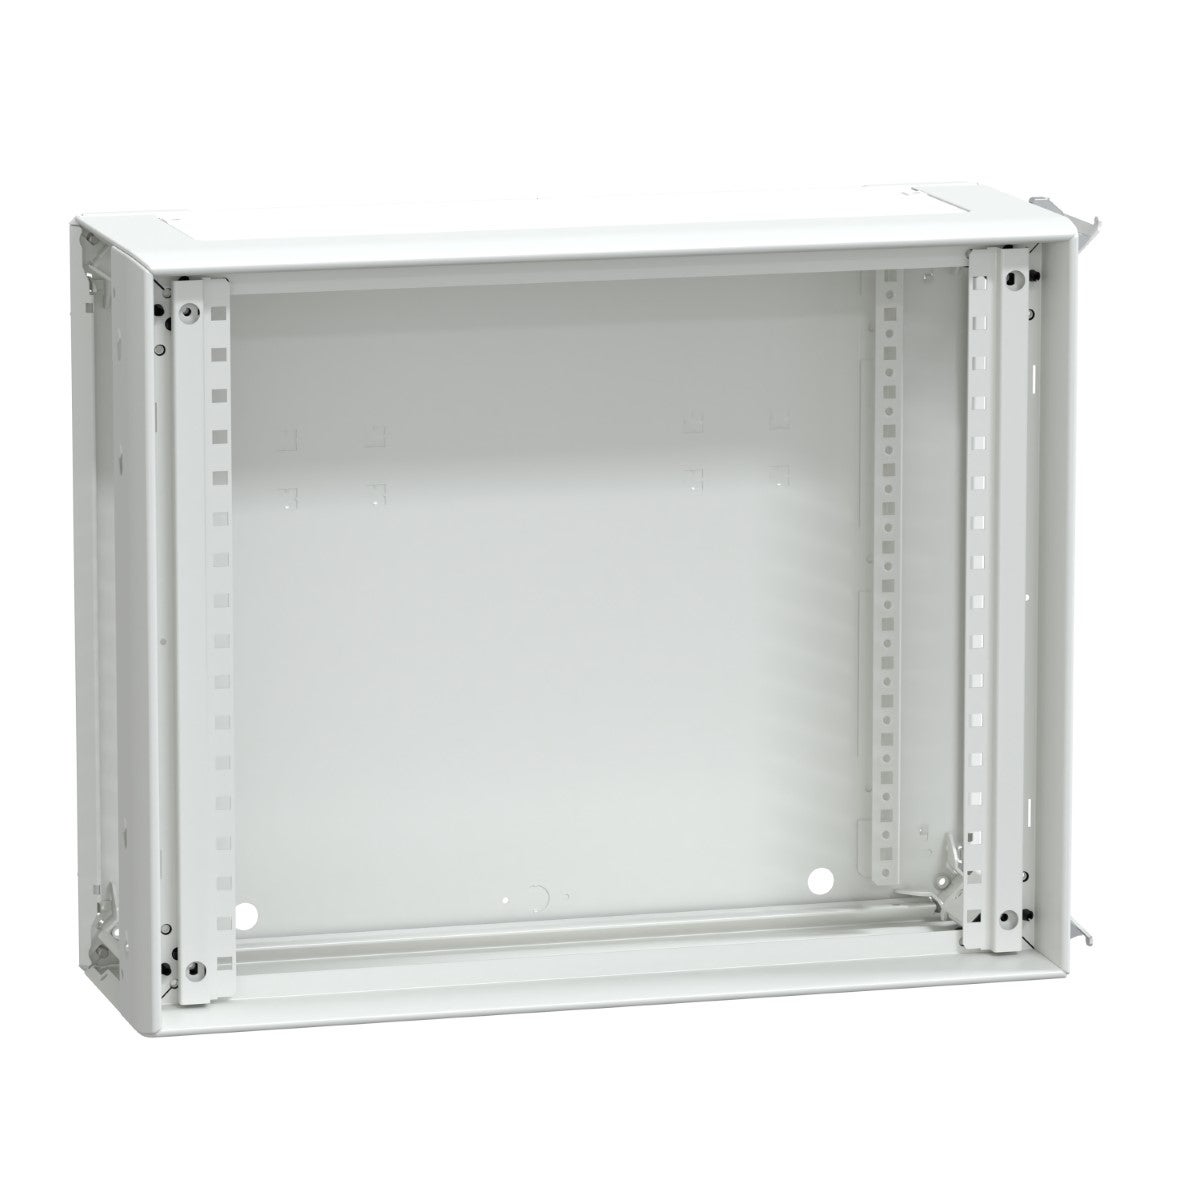 Enclosure extension, PrismaSeT G, wall mounted, without side plates, 9M, W600mm, H480mm, IP30,